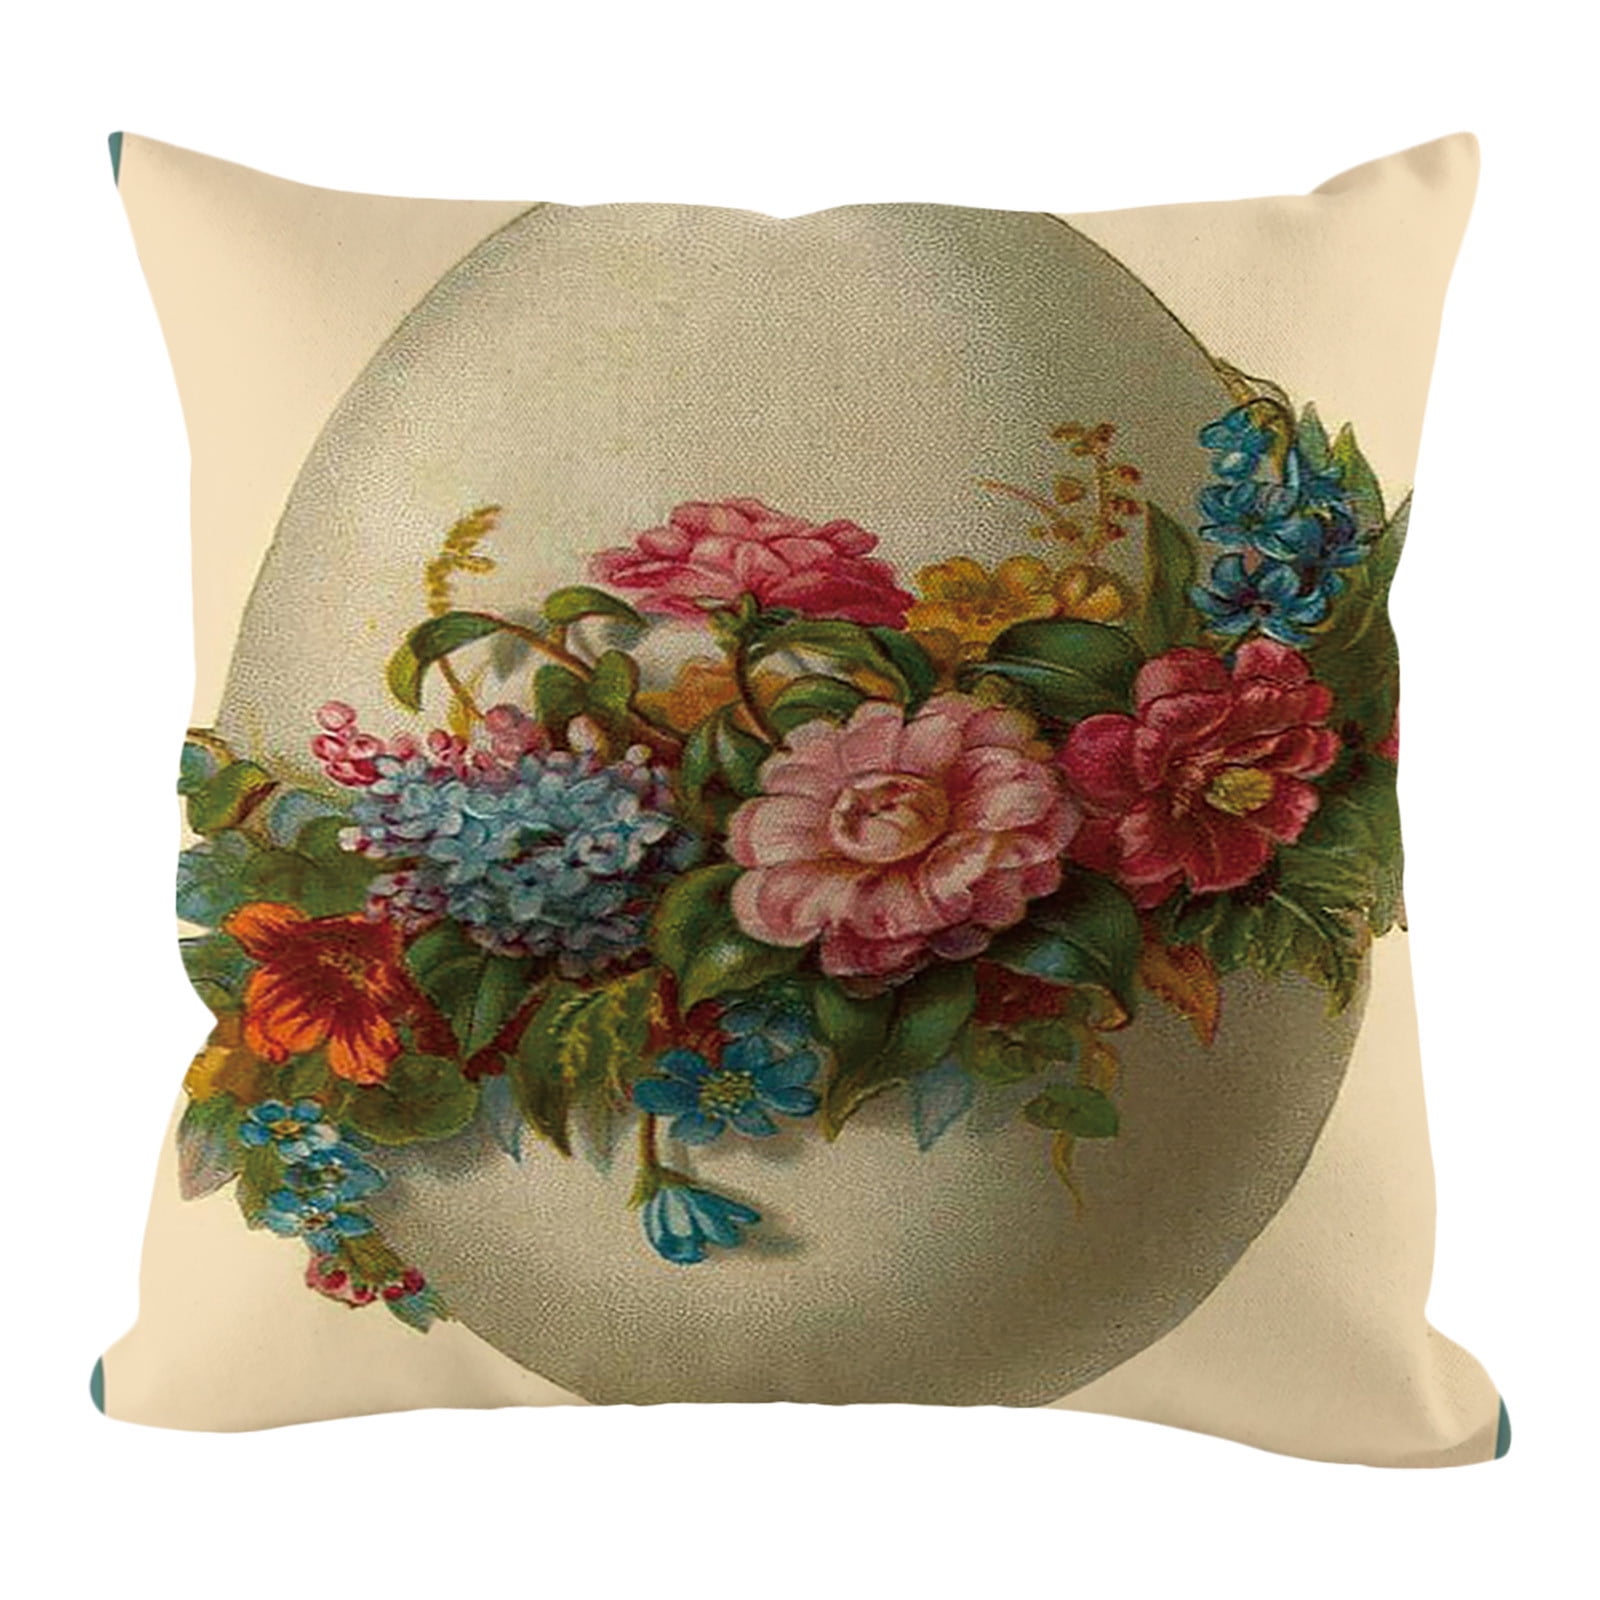 Brown The Pillow Collection Prys Floral Pillow 